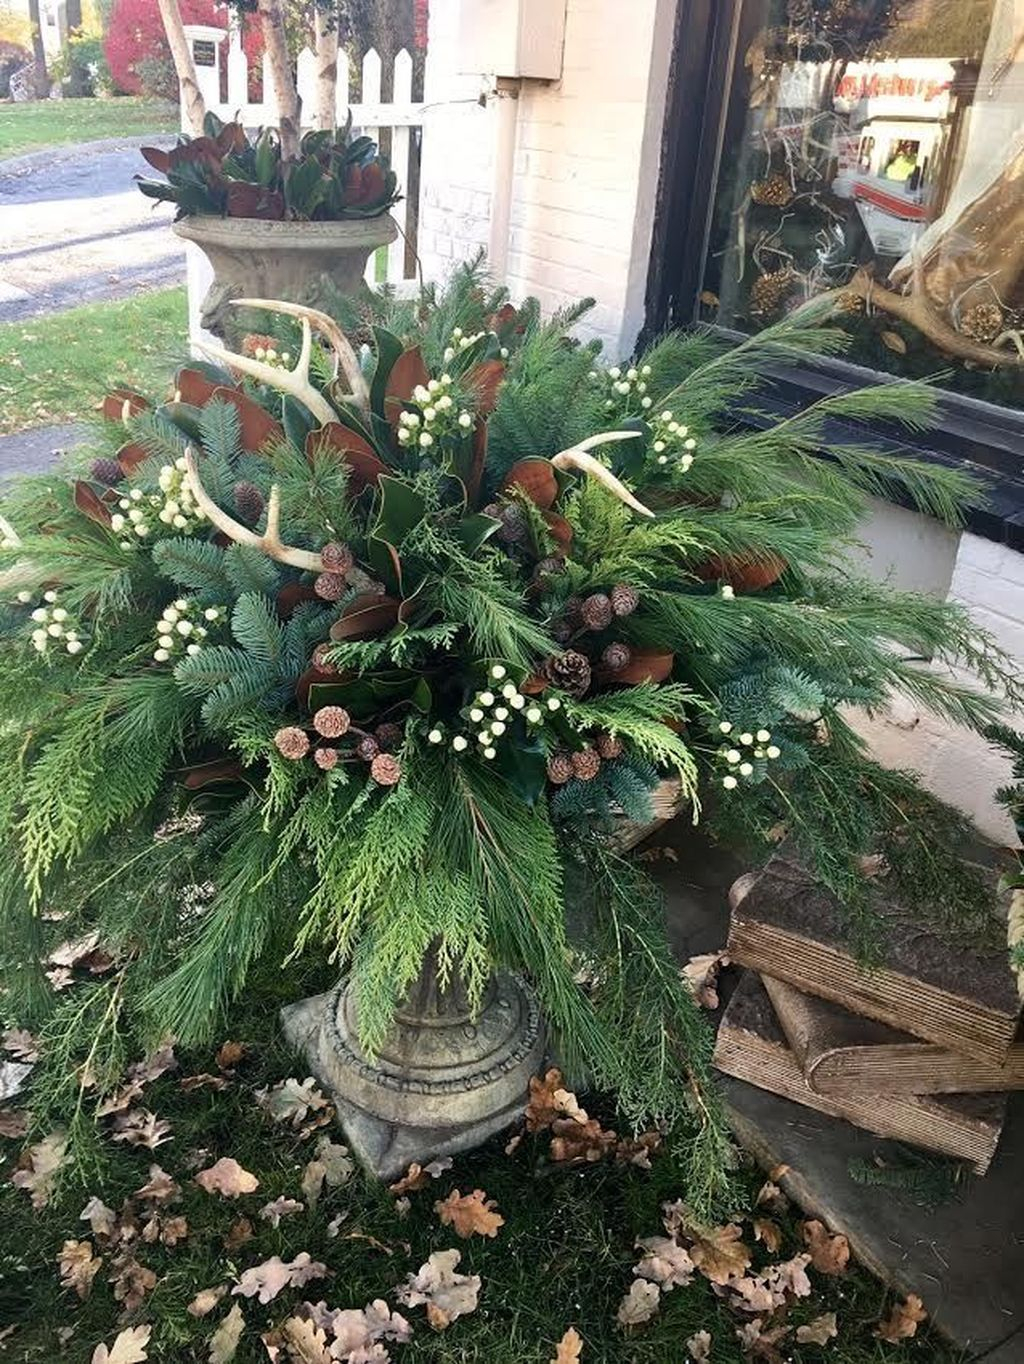 Marvelous Outdoor Holiday Planter Ideas To Beauty Porch Décor 21